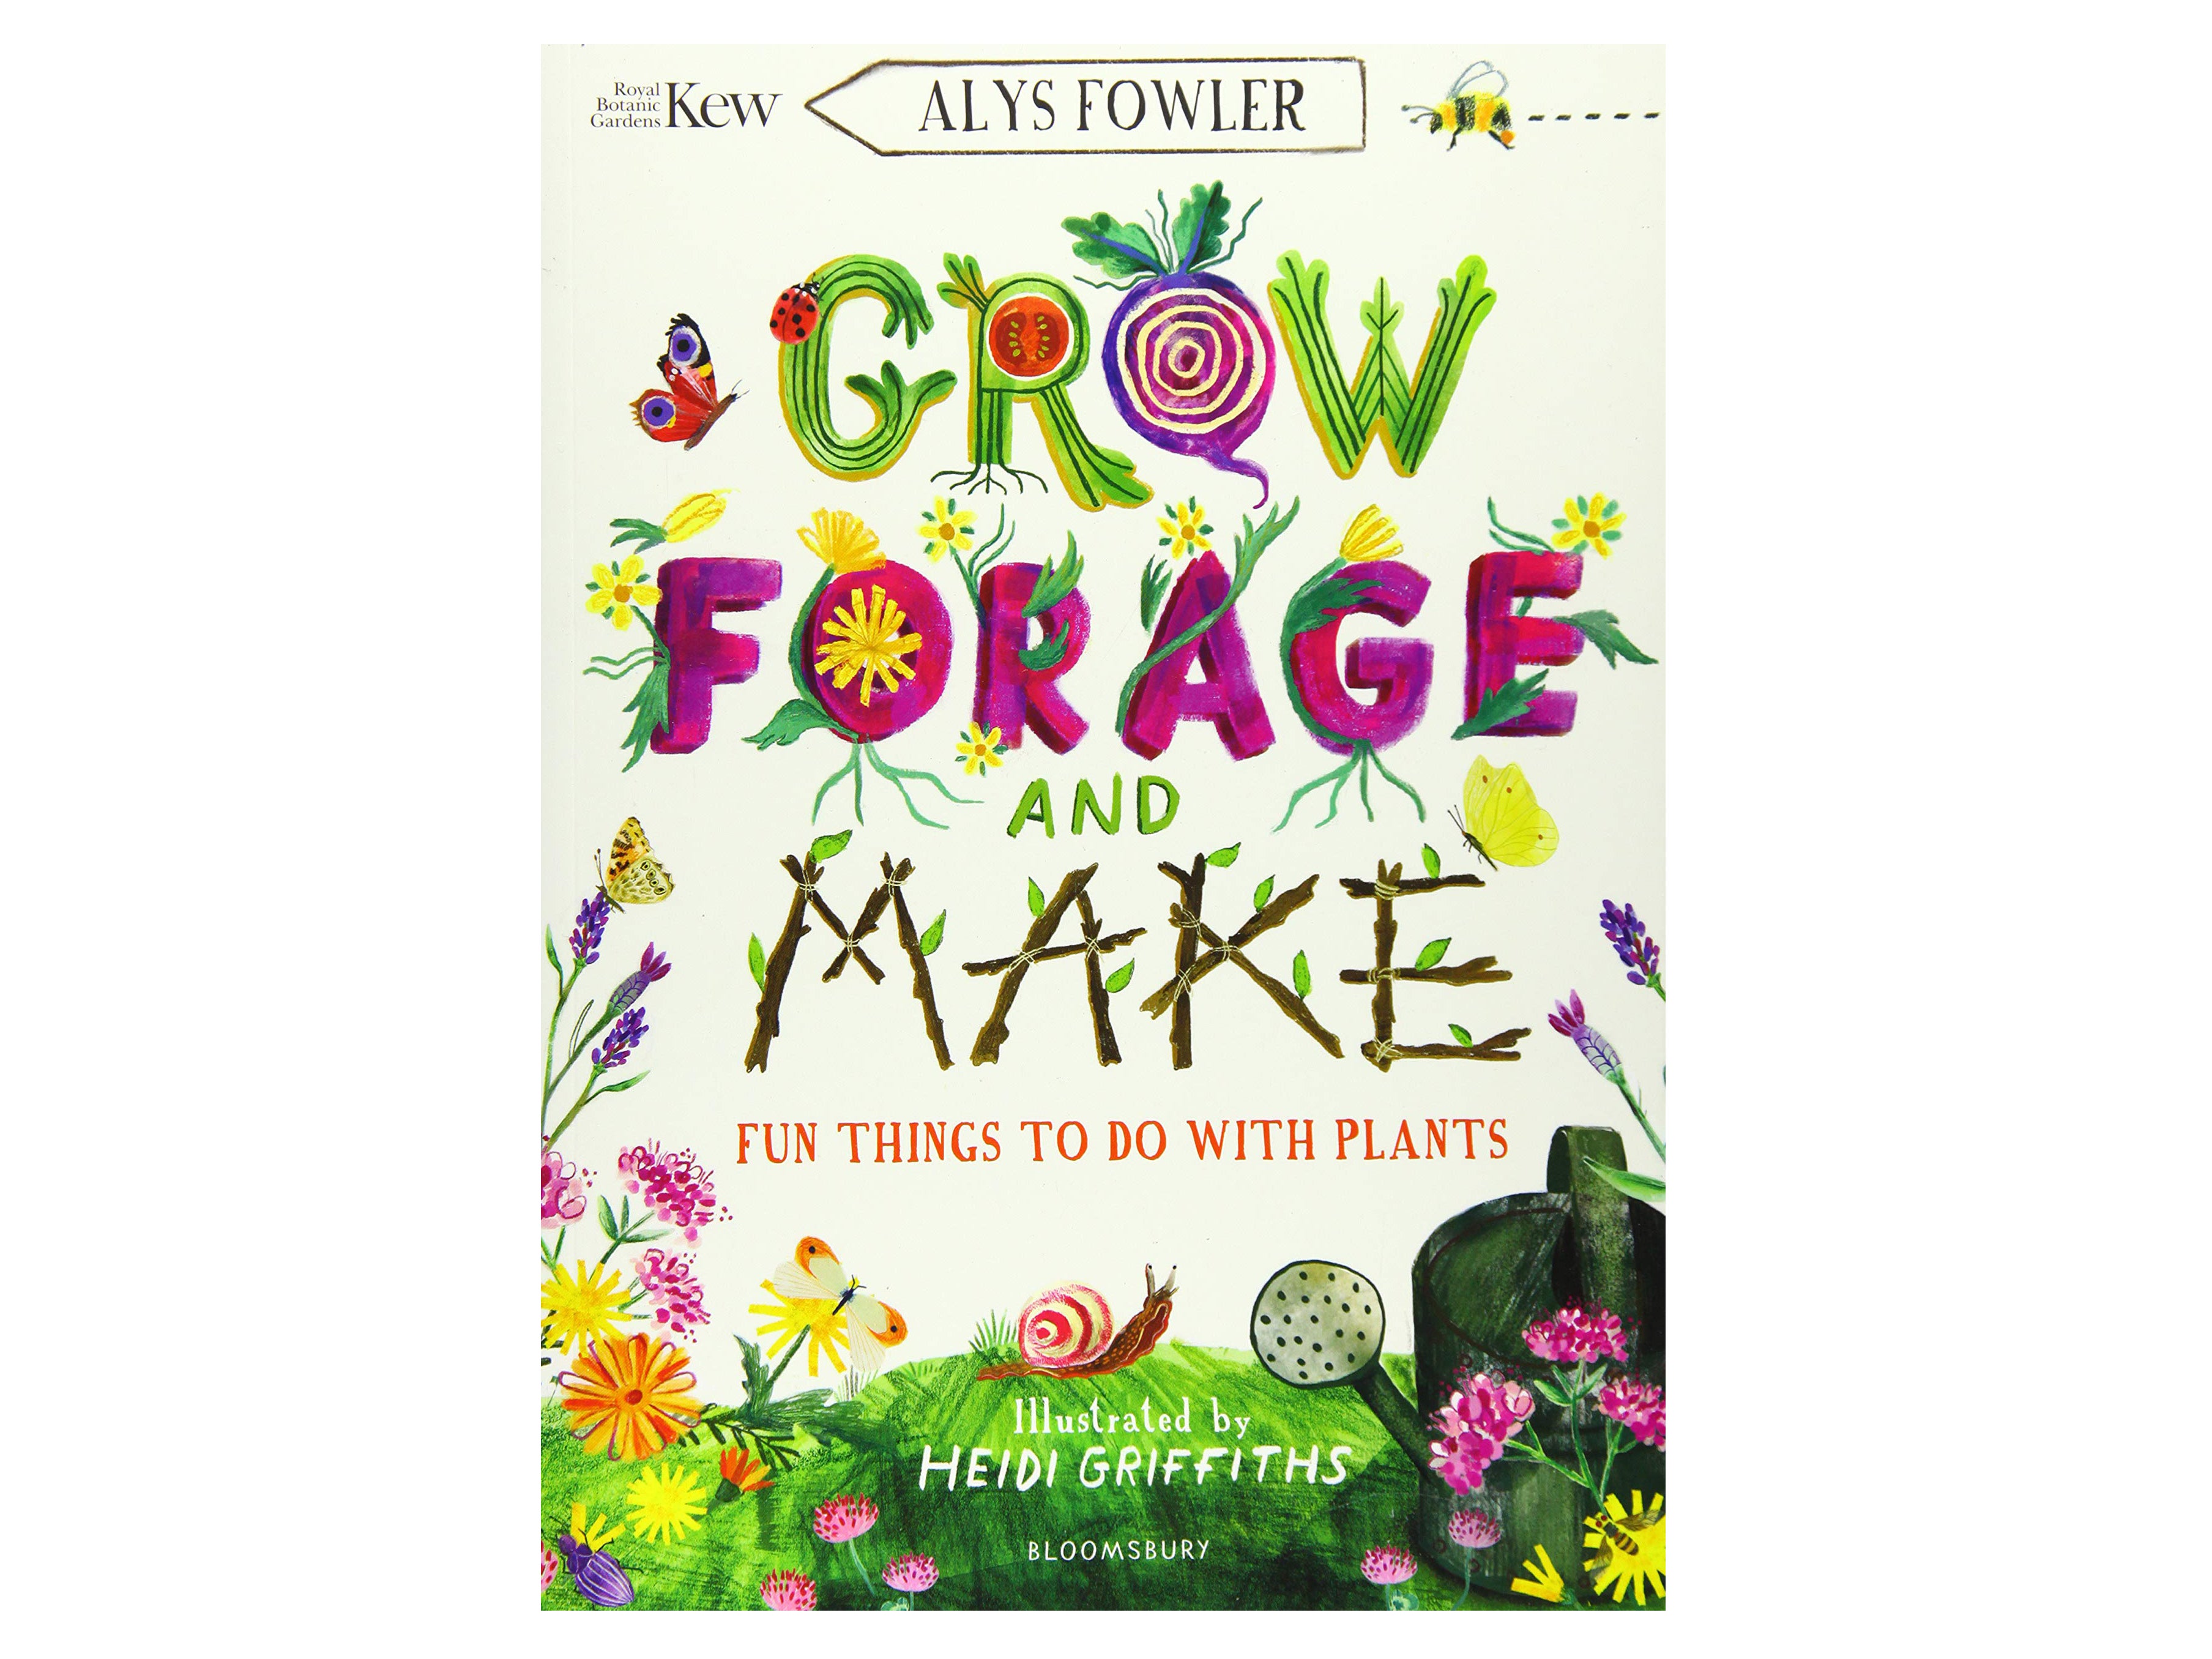 ‘Grow, Forage and Make’ by Alys Fowler.jpg